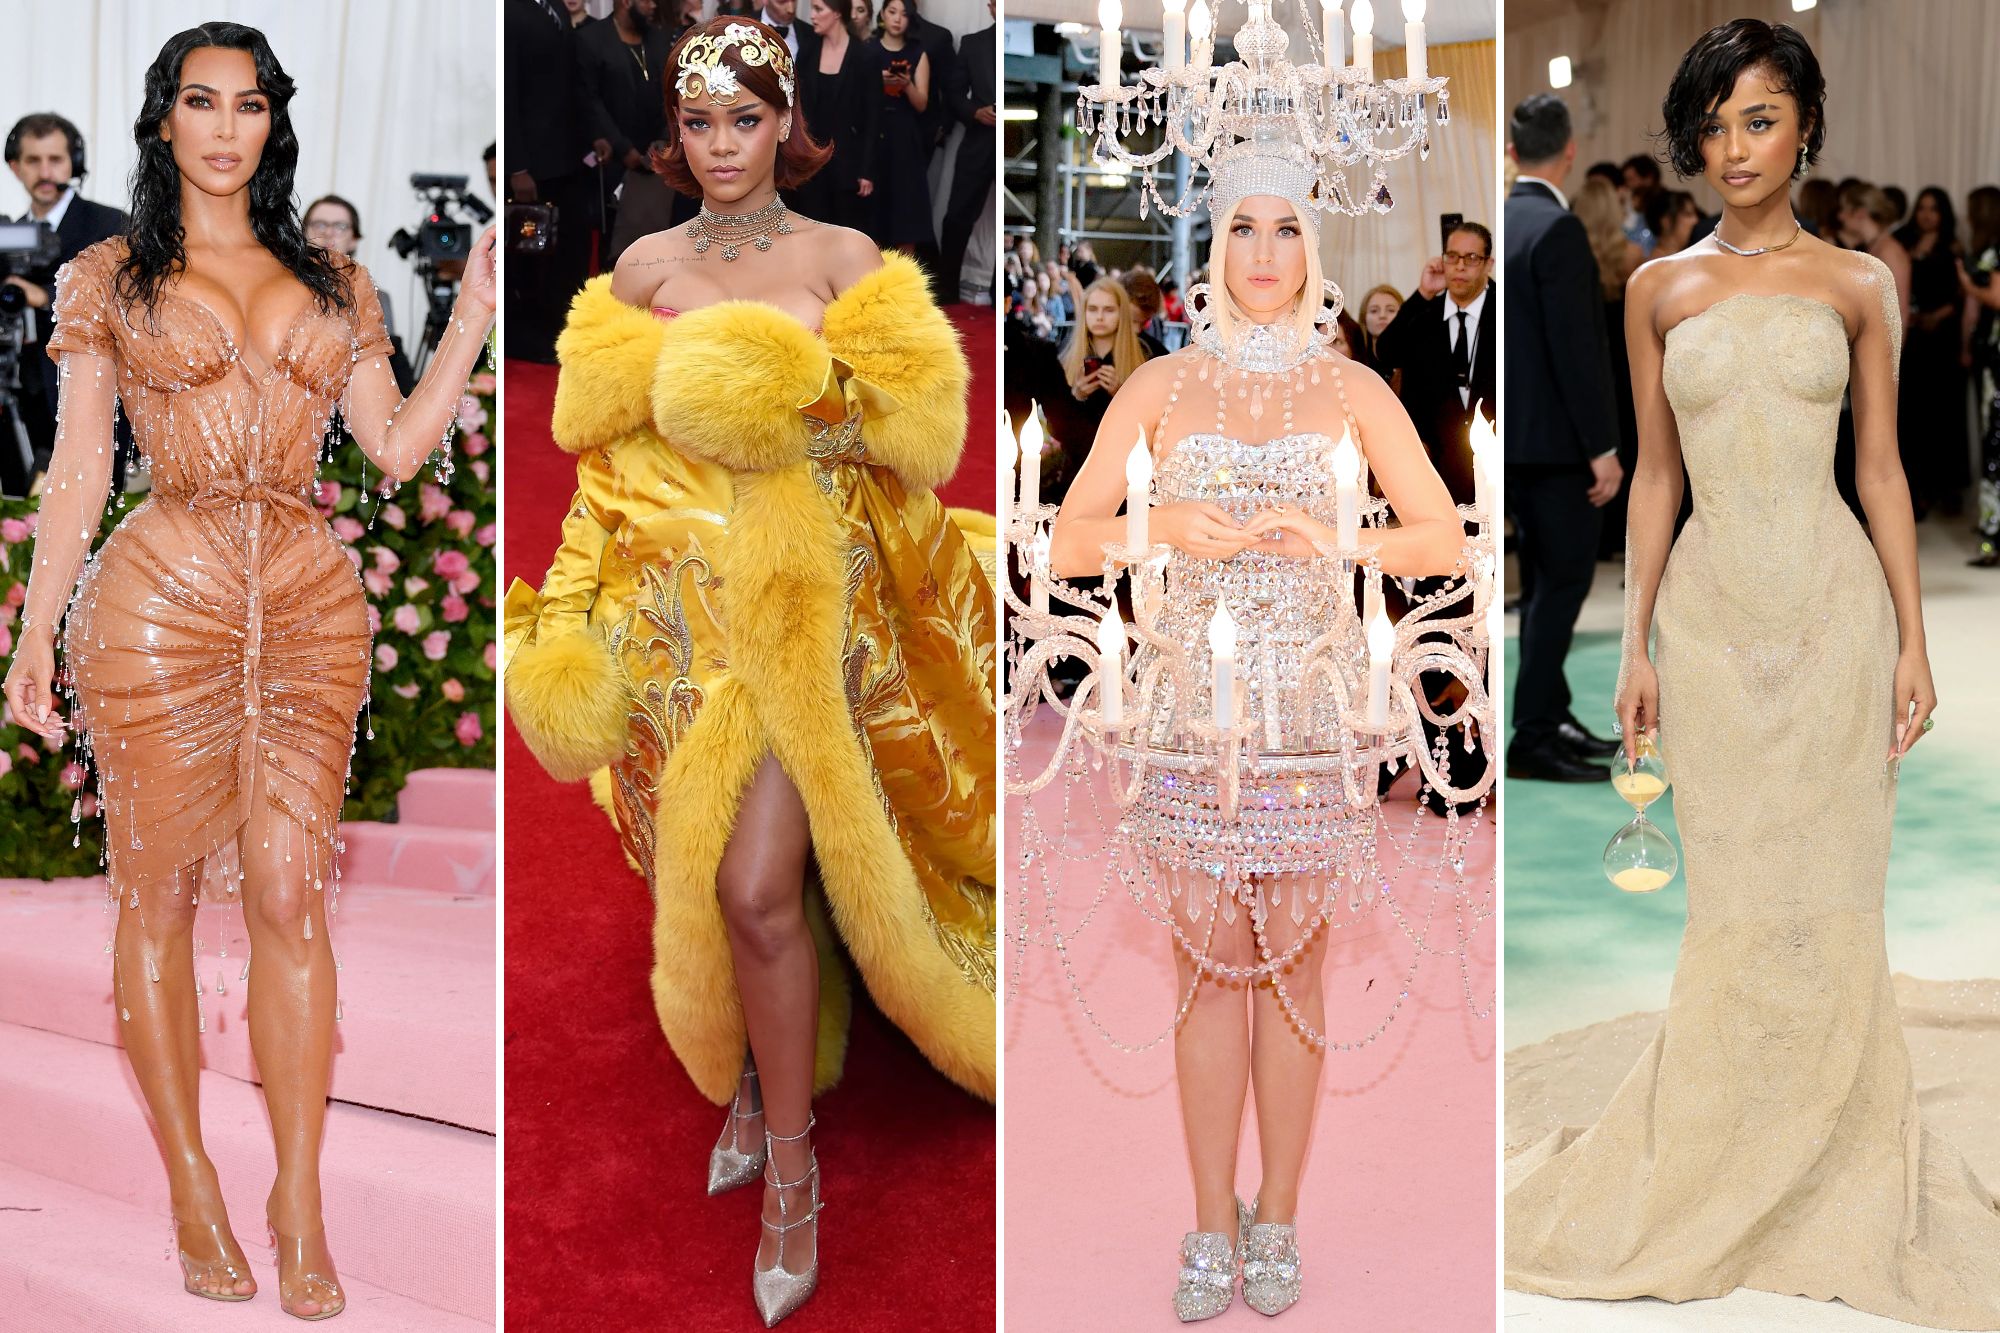 The craziest Met Gala outfits of all time: From Kim Kardashian to Rihanna